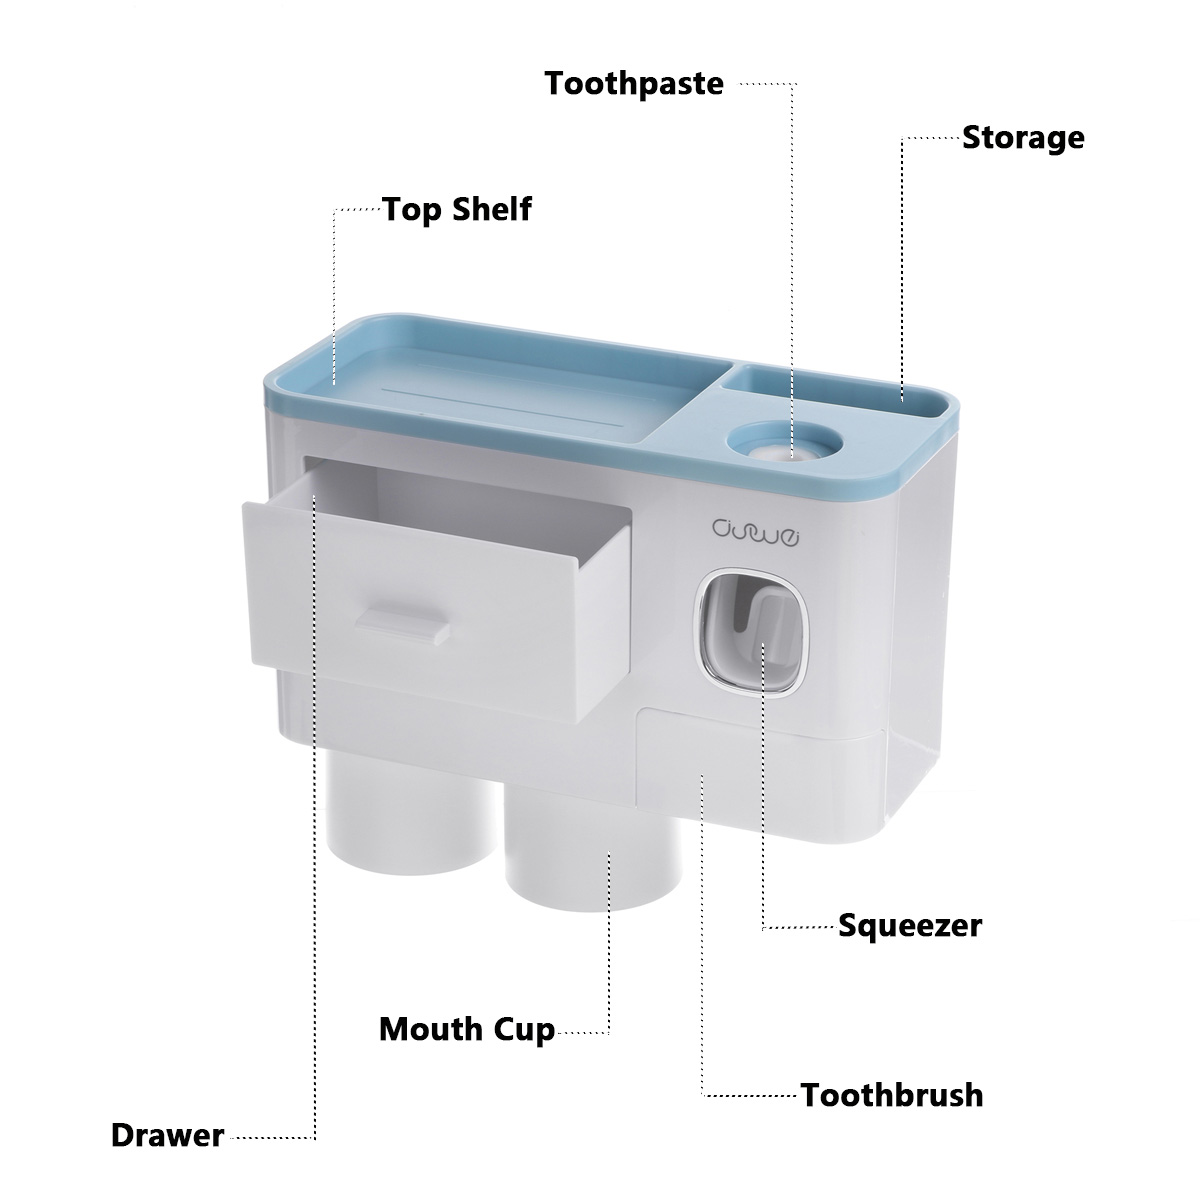 Toothbrush-Holder-Automatic-Toothpaste-Dispenser-With-Cup-Wall-Mount-Toiletries-Storage-Rack-Bathroo-1755230-5